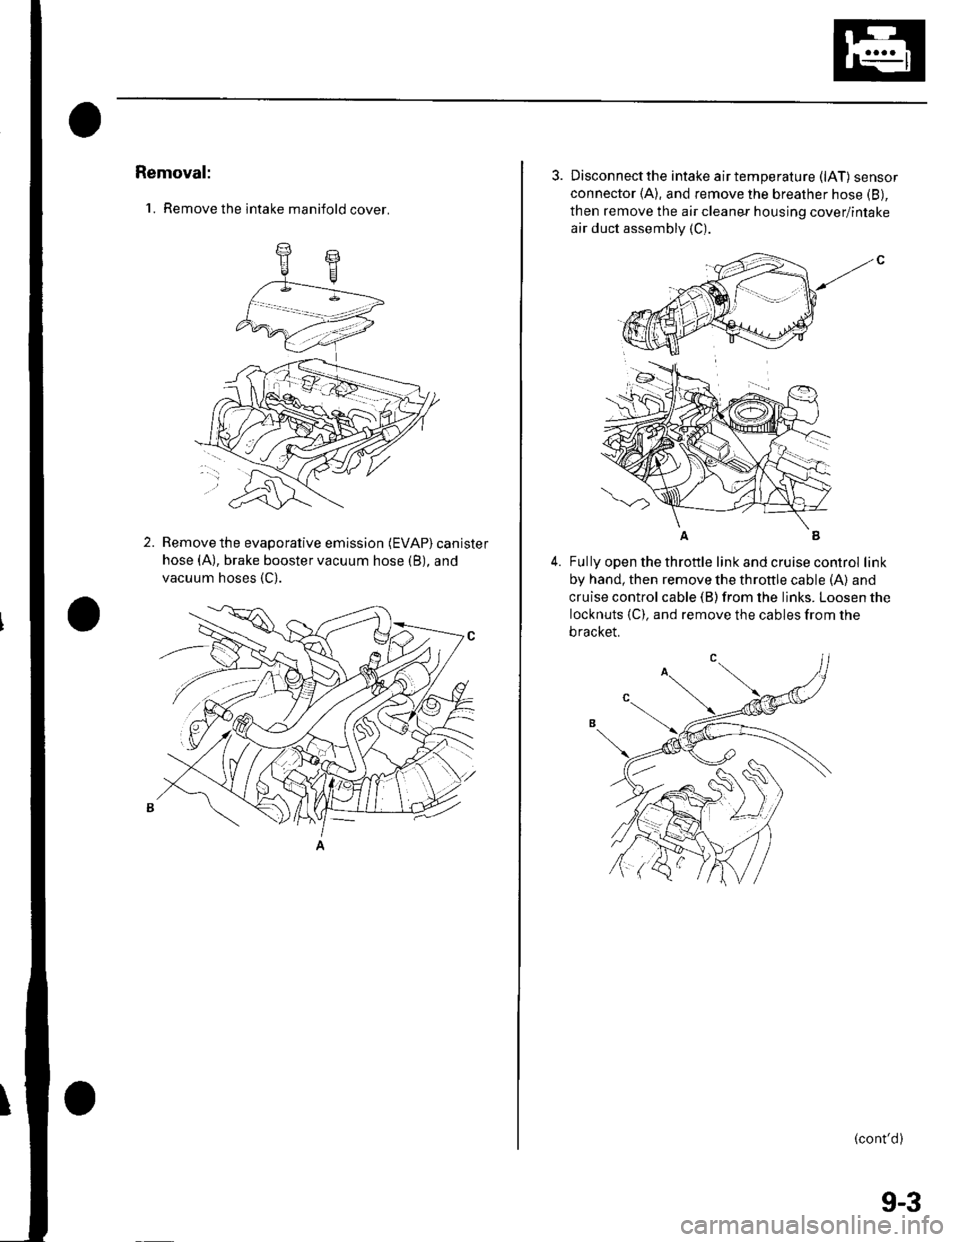 HONDA CIVIC 2003 7.G Workshop Manual Removal:
1. Remove the intake manifold cover.
2.Remove the evaporative emission (EVAP) canister
hose (A), brake booster vacuum hose (B), and
vacuum hoses {C).
3. Disconnectthe intake airtemperature (